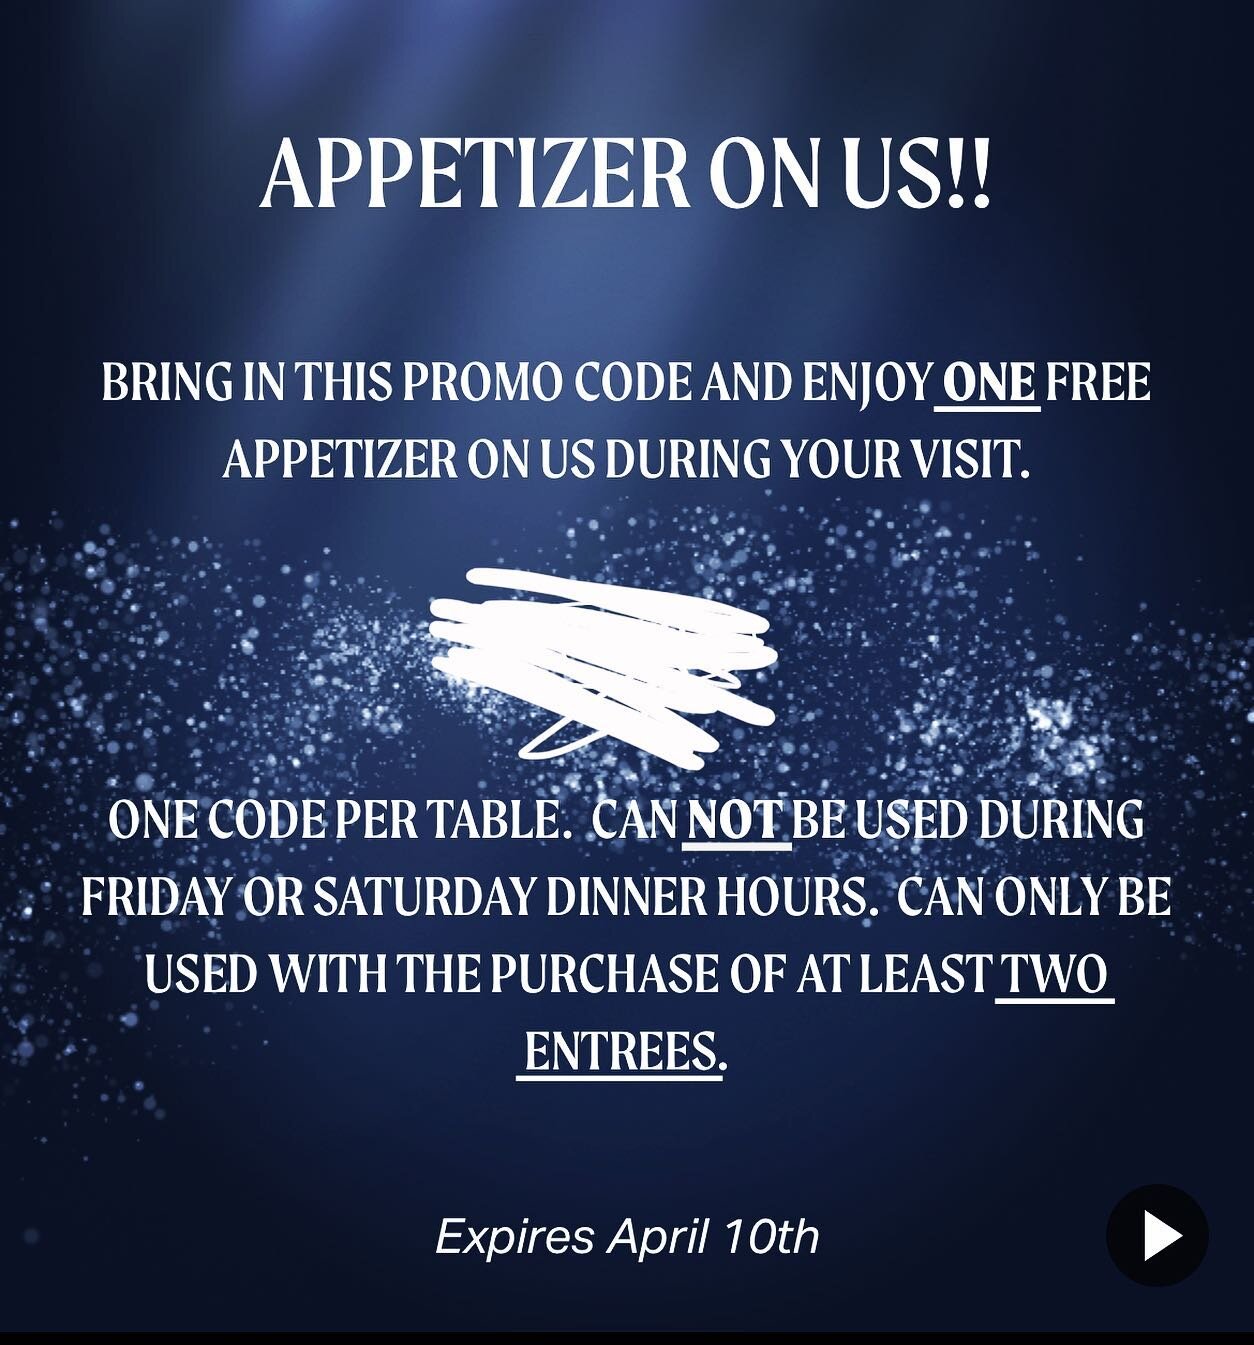 Appetizer On Us promo for the month of March!! Head on over to our website and show the code to your server for your free appetizer!! 

Restrictions apply. 

SfSeaGirt.com

#march #freeappetizer #special #promo #scarboroughfair #seagirt #jerseyshore 